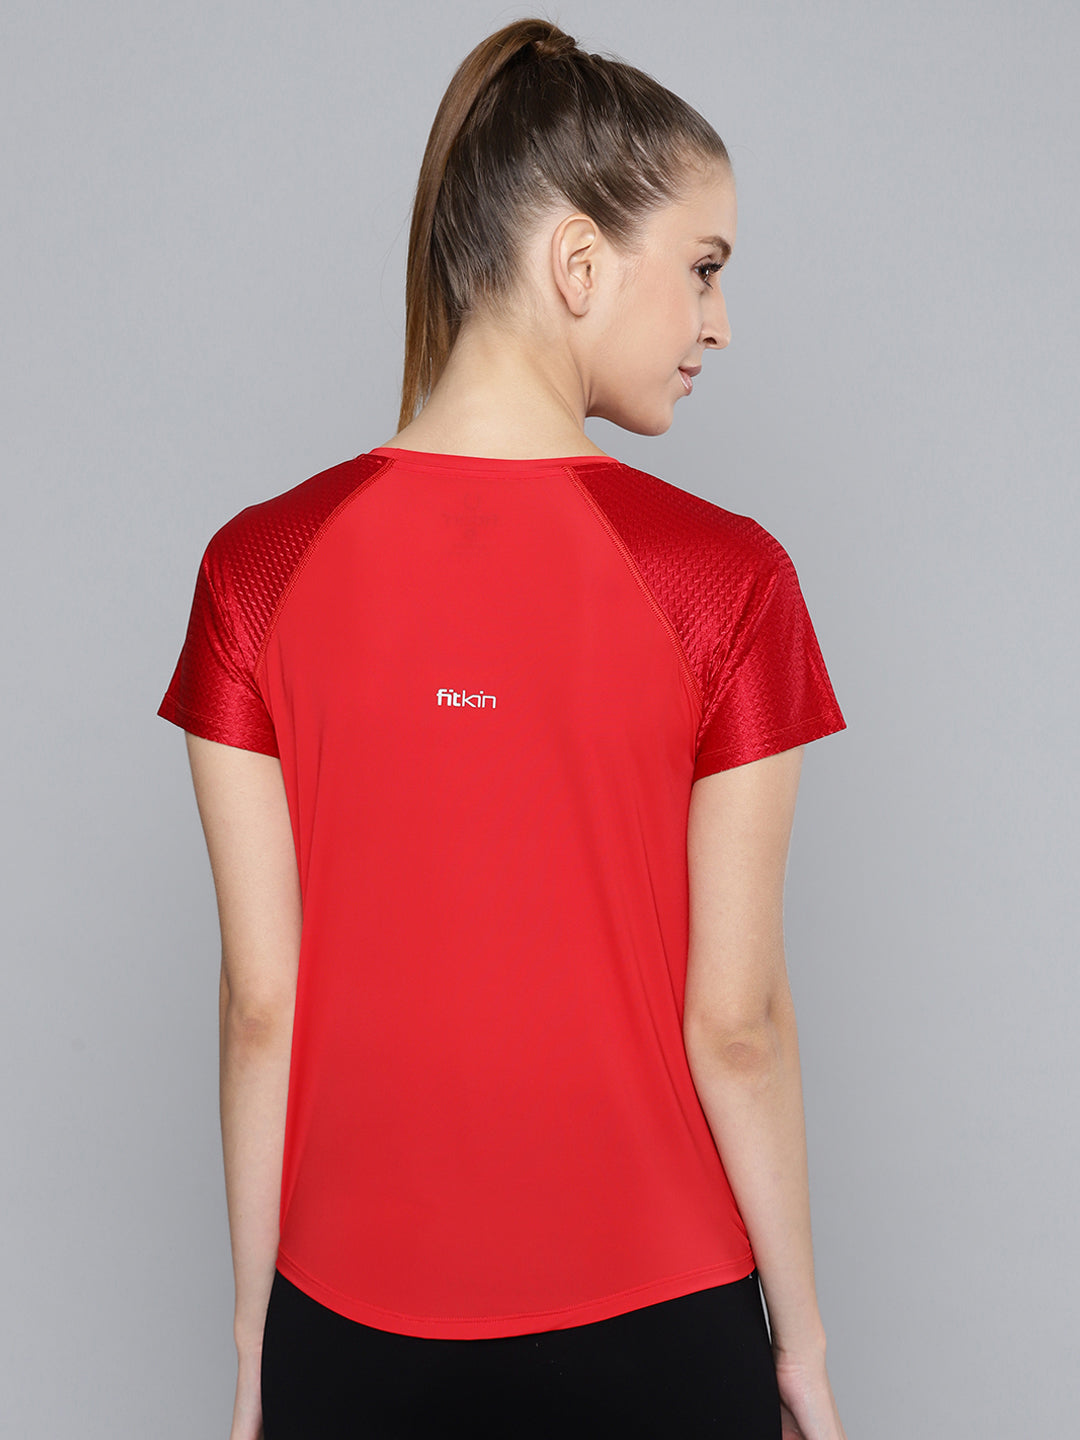 Women's Red Colourblocked Slim Fit Training or Gym T-shirt – Fitkin